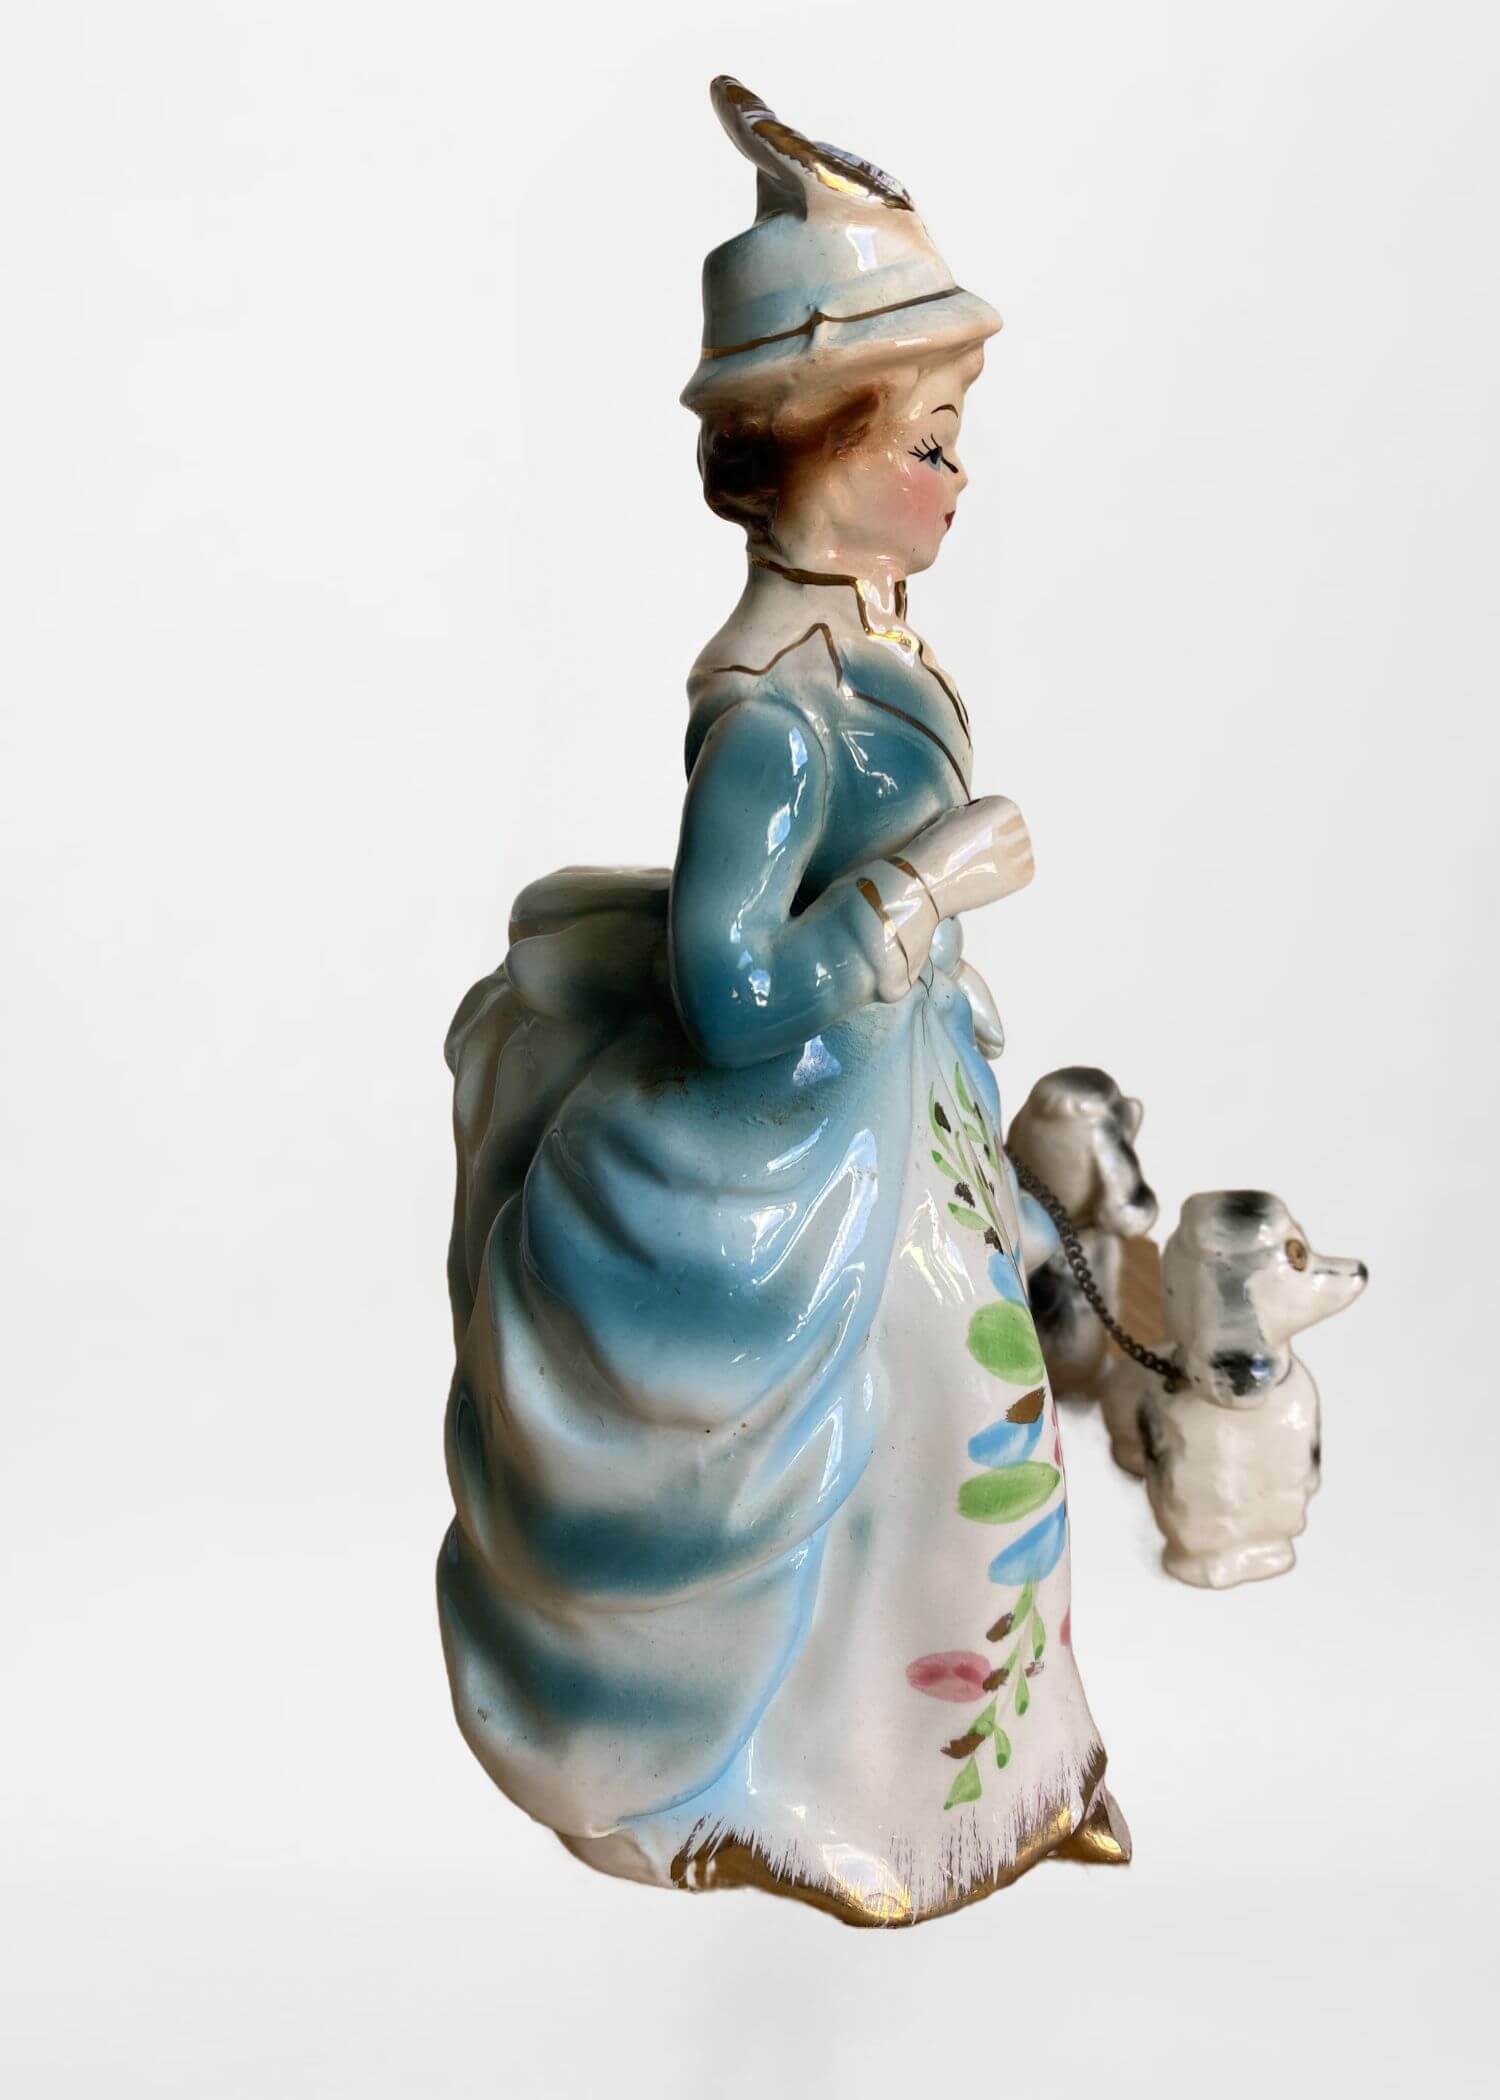 Porcelain Lady with Poodle FIGURINE of Woman in blue white floral dress Walking Her Dogs on a Leash, Vintage Figurines Porcelain Ceramic 1960c antiques 